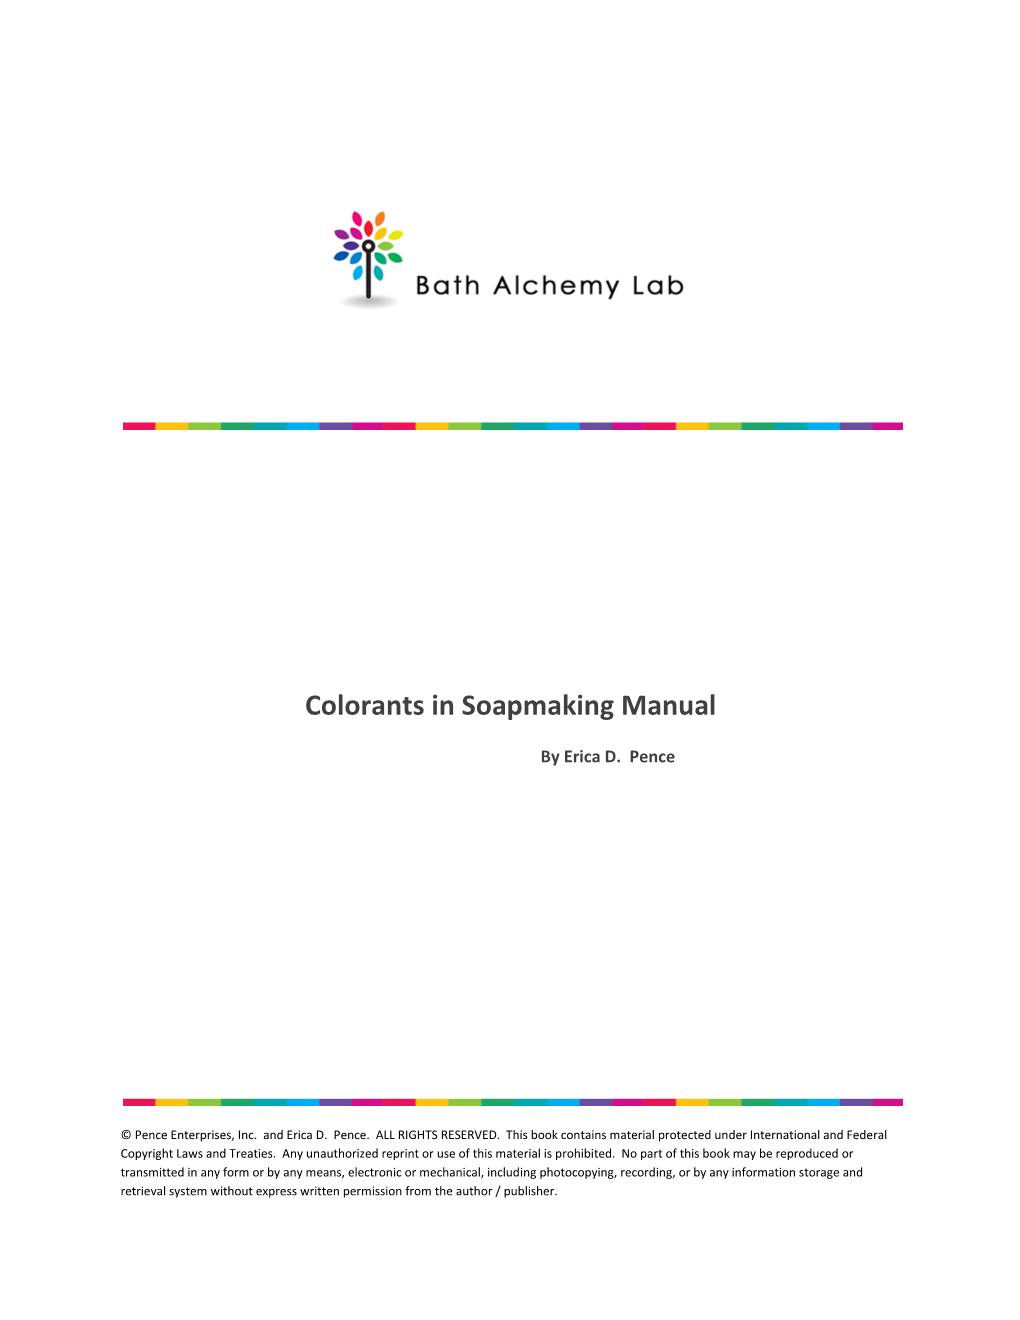 Colorants in Soapmaking Manual